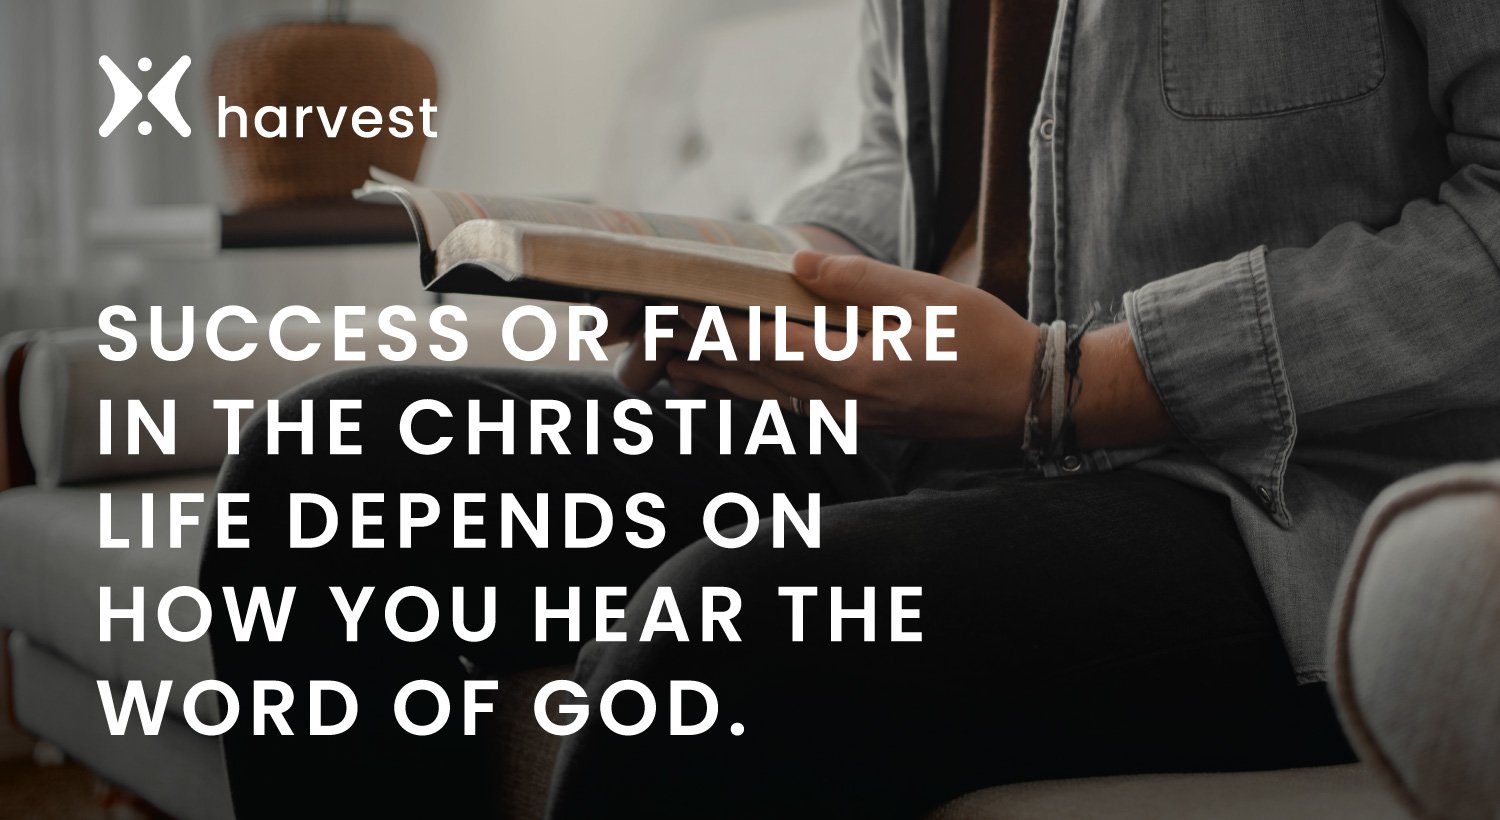 Success or failure in the Christian life depends on how you hear the Word of God.